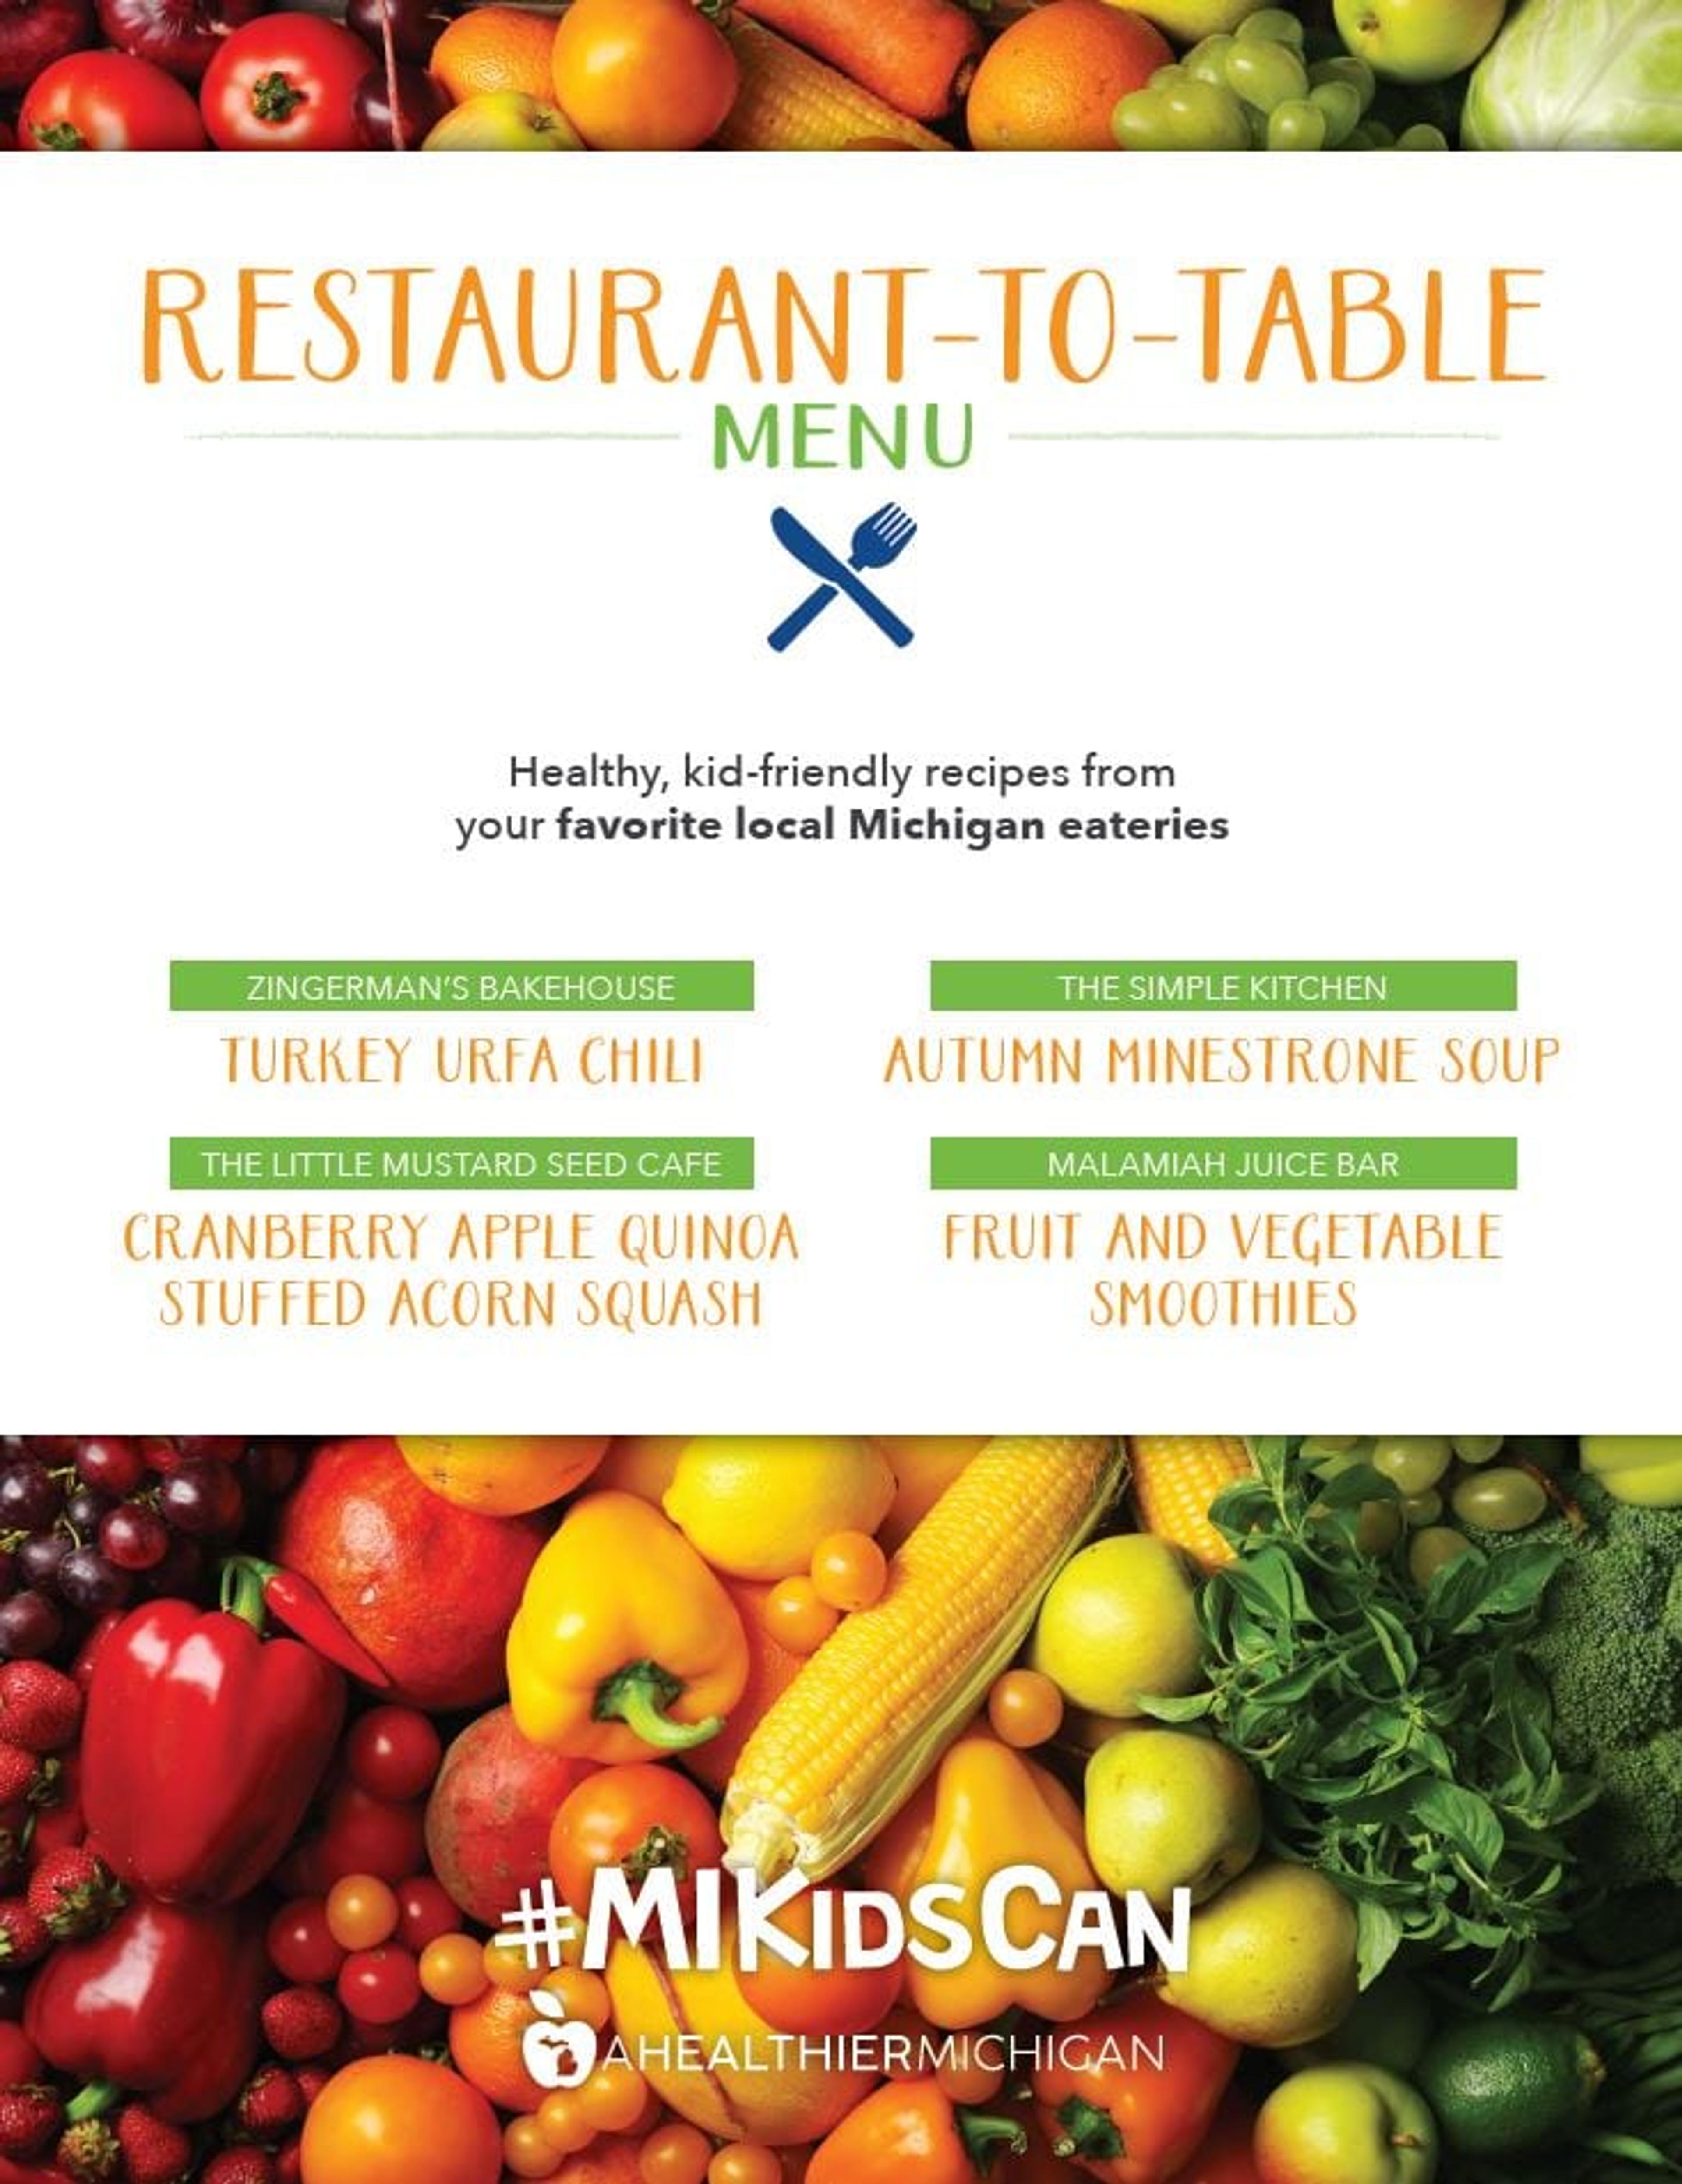 menu cover with list of recipes and an image of colorful vegetables.